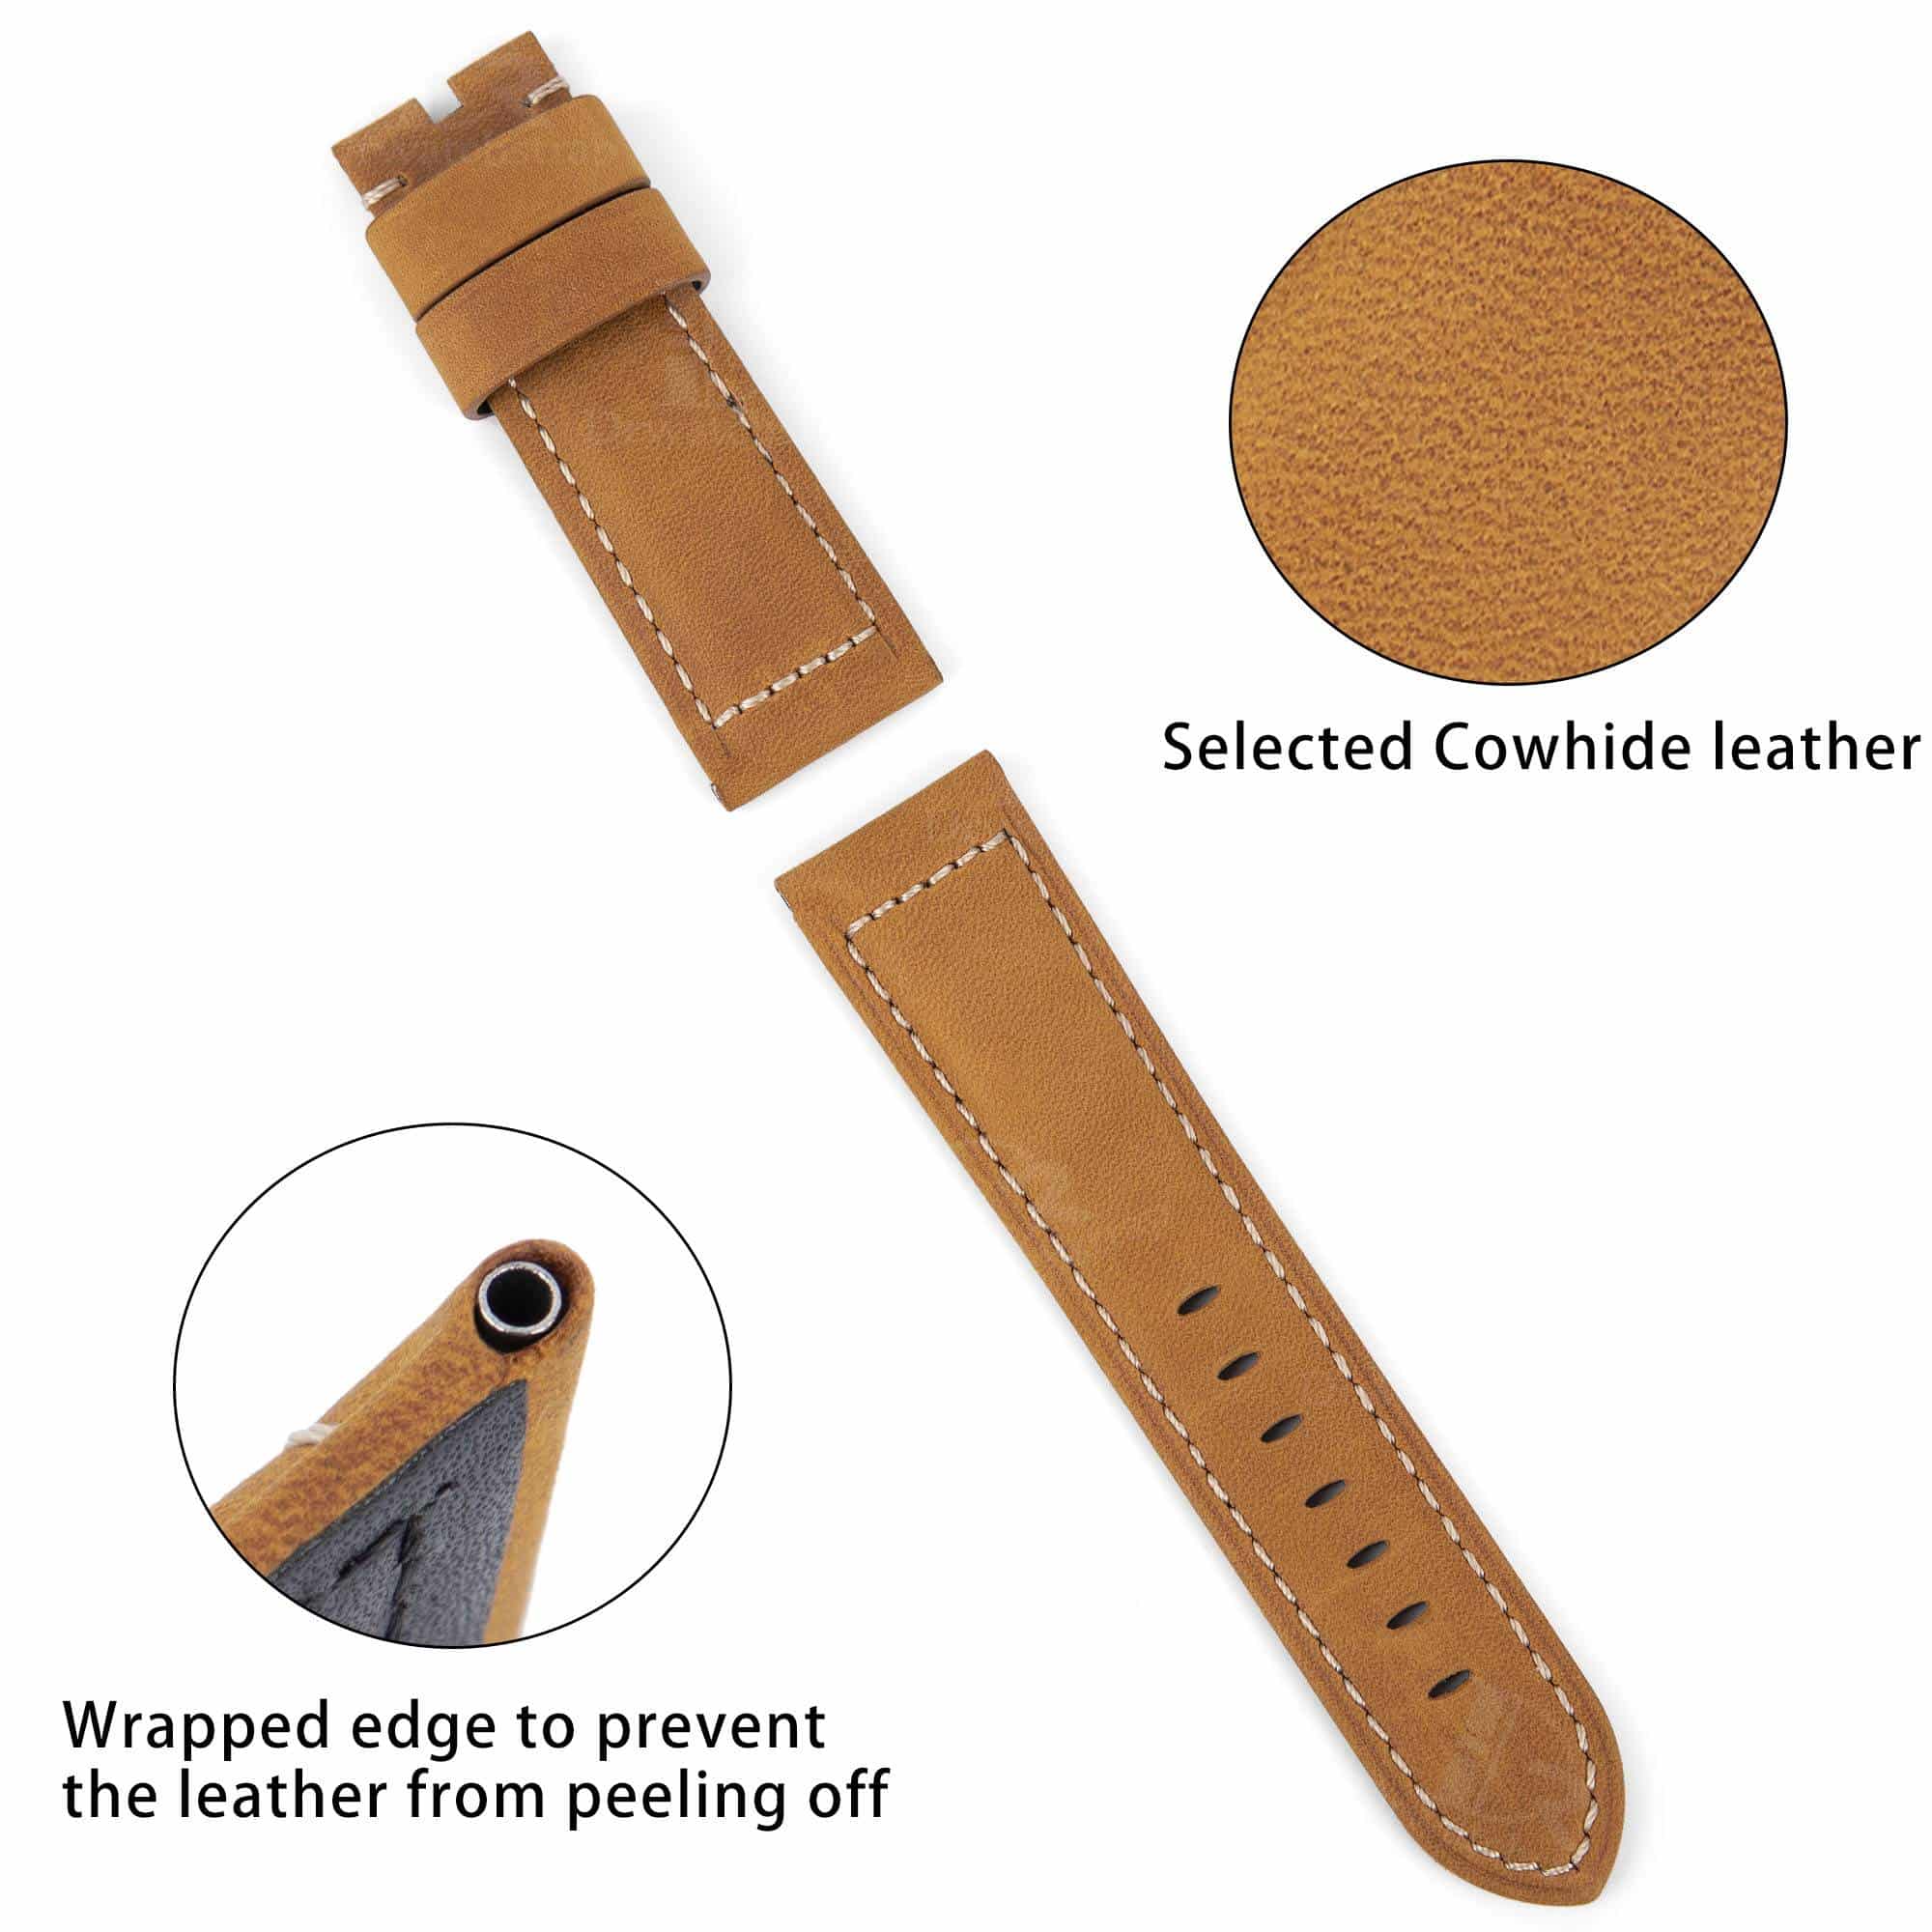 Premium custom best aftermarket calfskin material brown Panerai 22mm leather strap & watch band replacement OEM handmade for Panerai Luminor Radiomir luxury watches from DR Watchstrap online - Shop the wholesale and retail genuine calf leather watch straps and watch bands at a low price